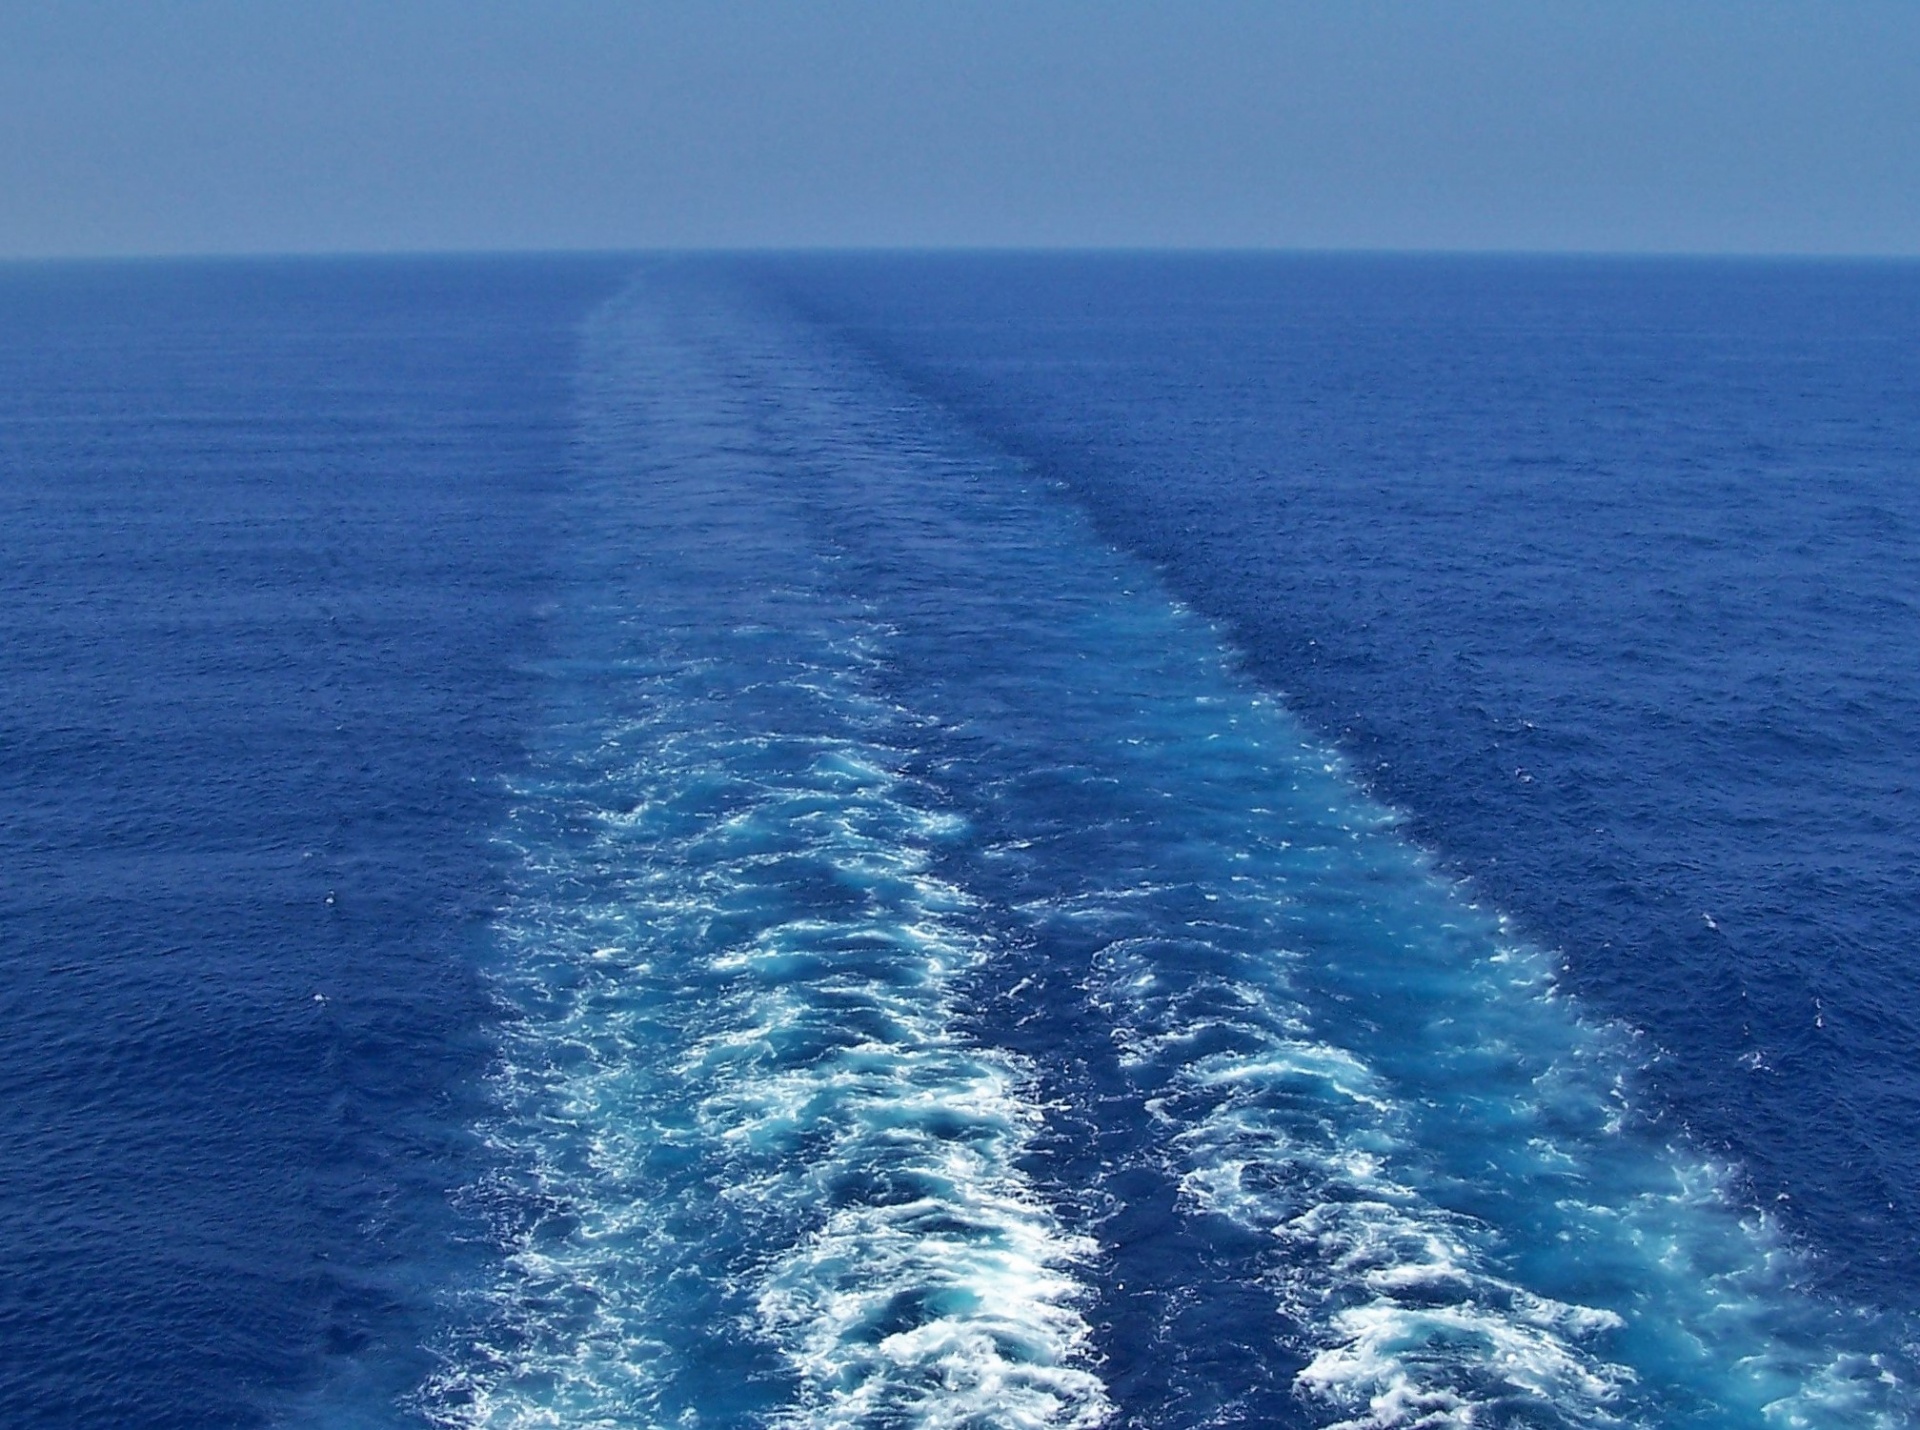 The wake from behind a cruise ship in the beautiful blue water of the Pacific Ocean as it trails to meet a beautiful clear blue sky.